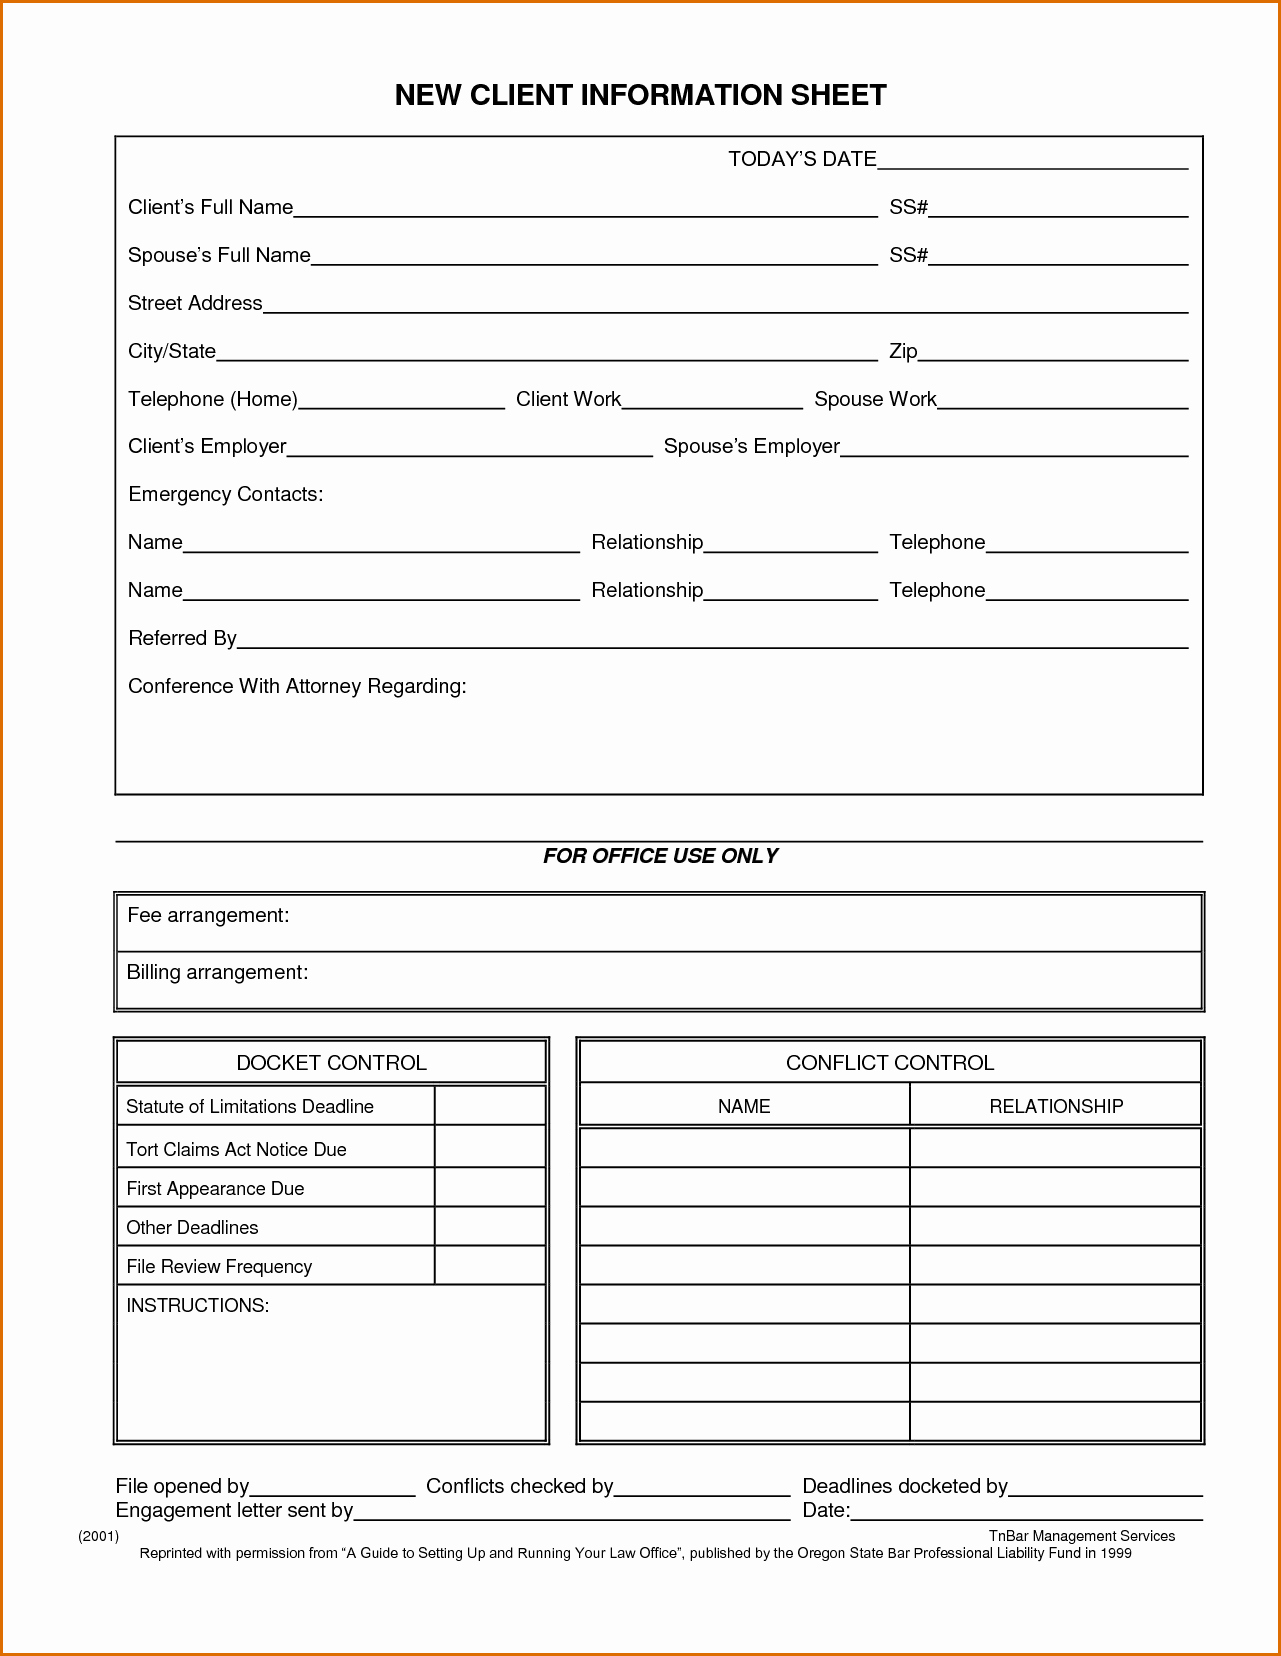 New Customer form Template Word Fresh 5 Client Information Sheet